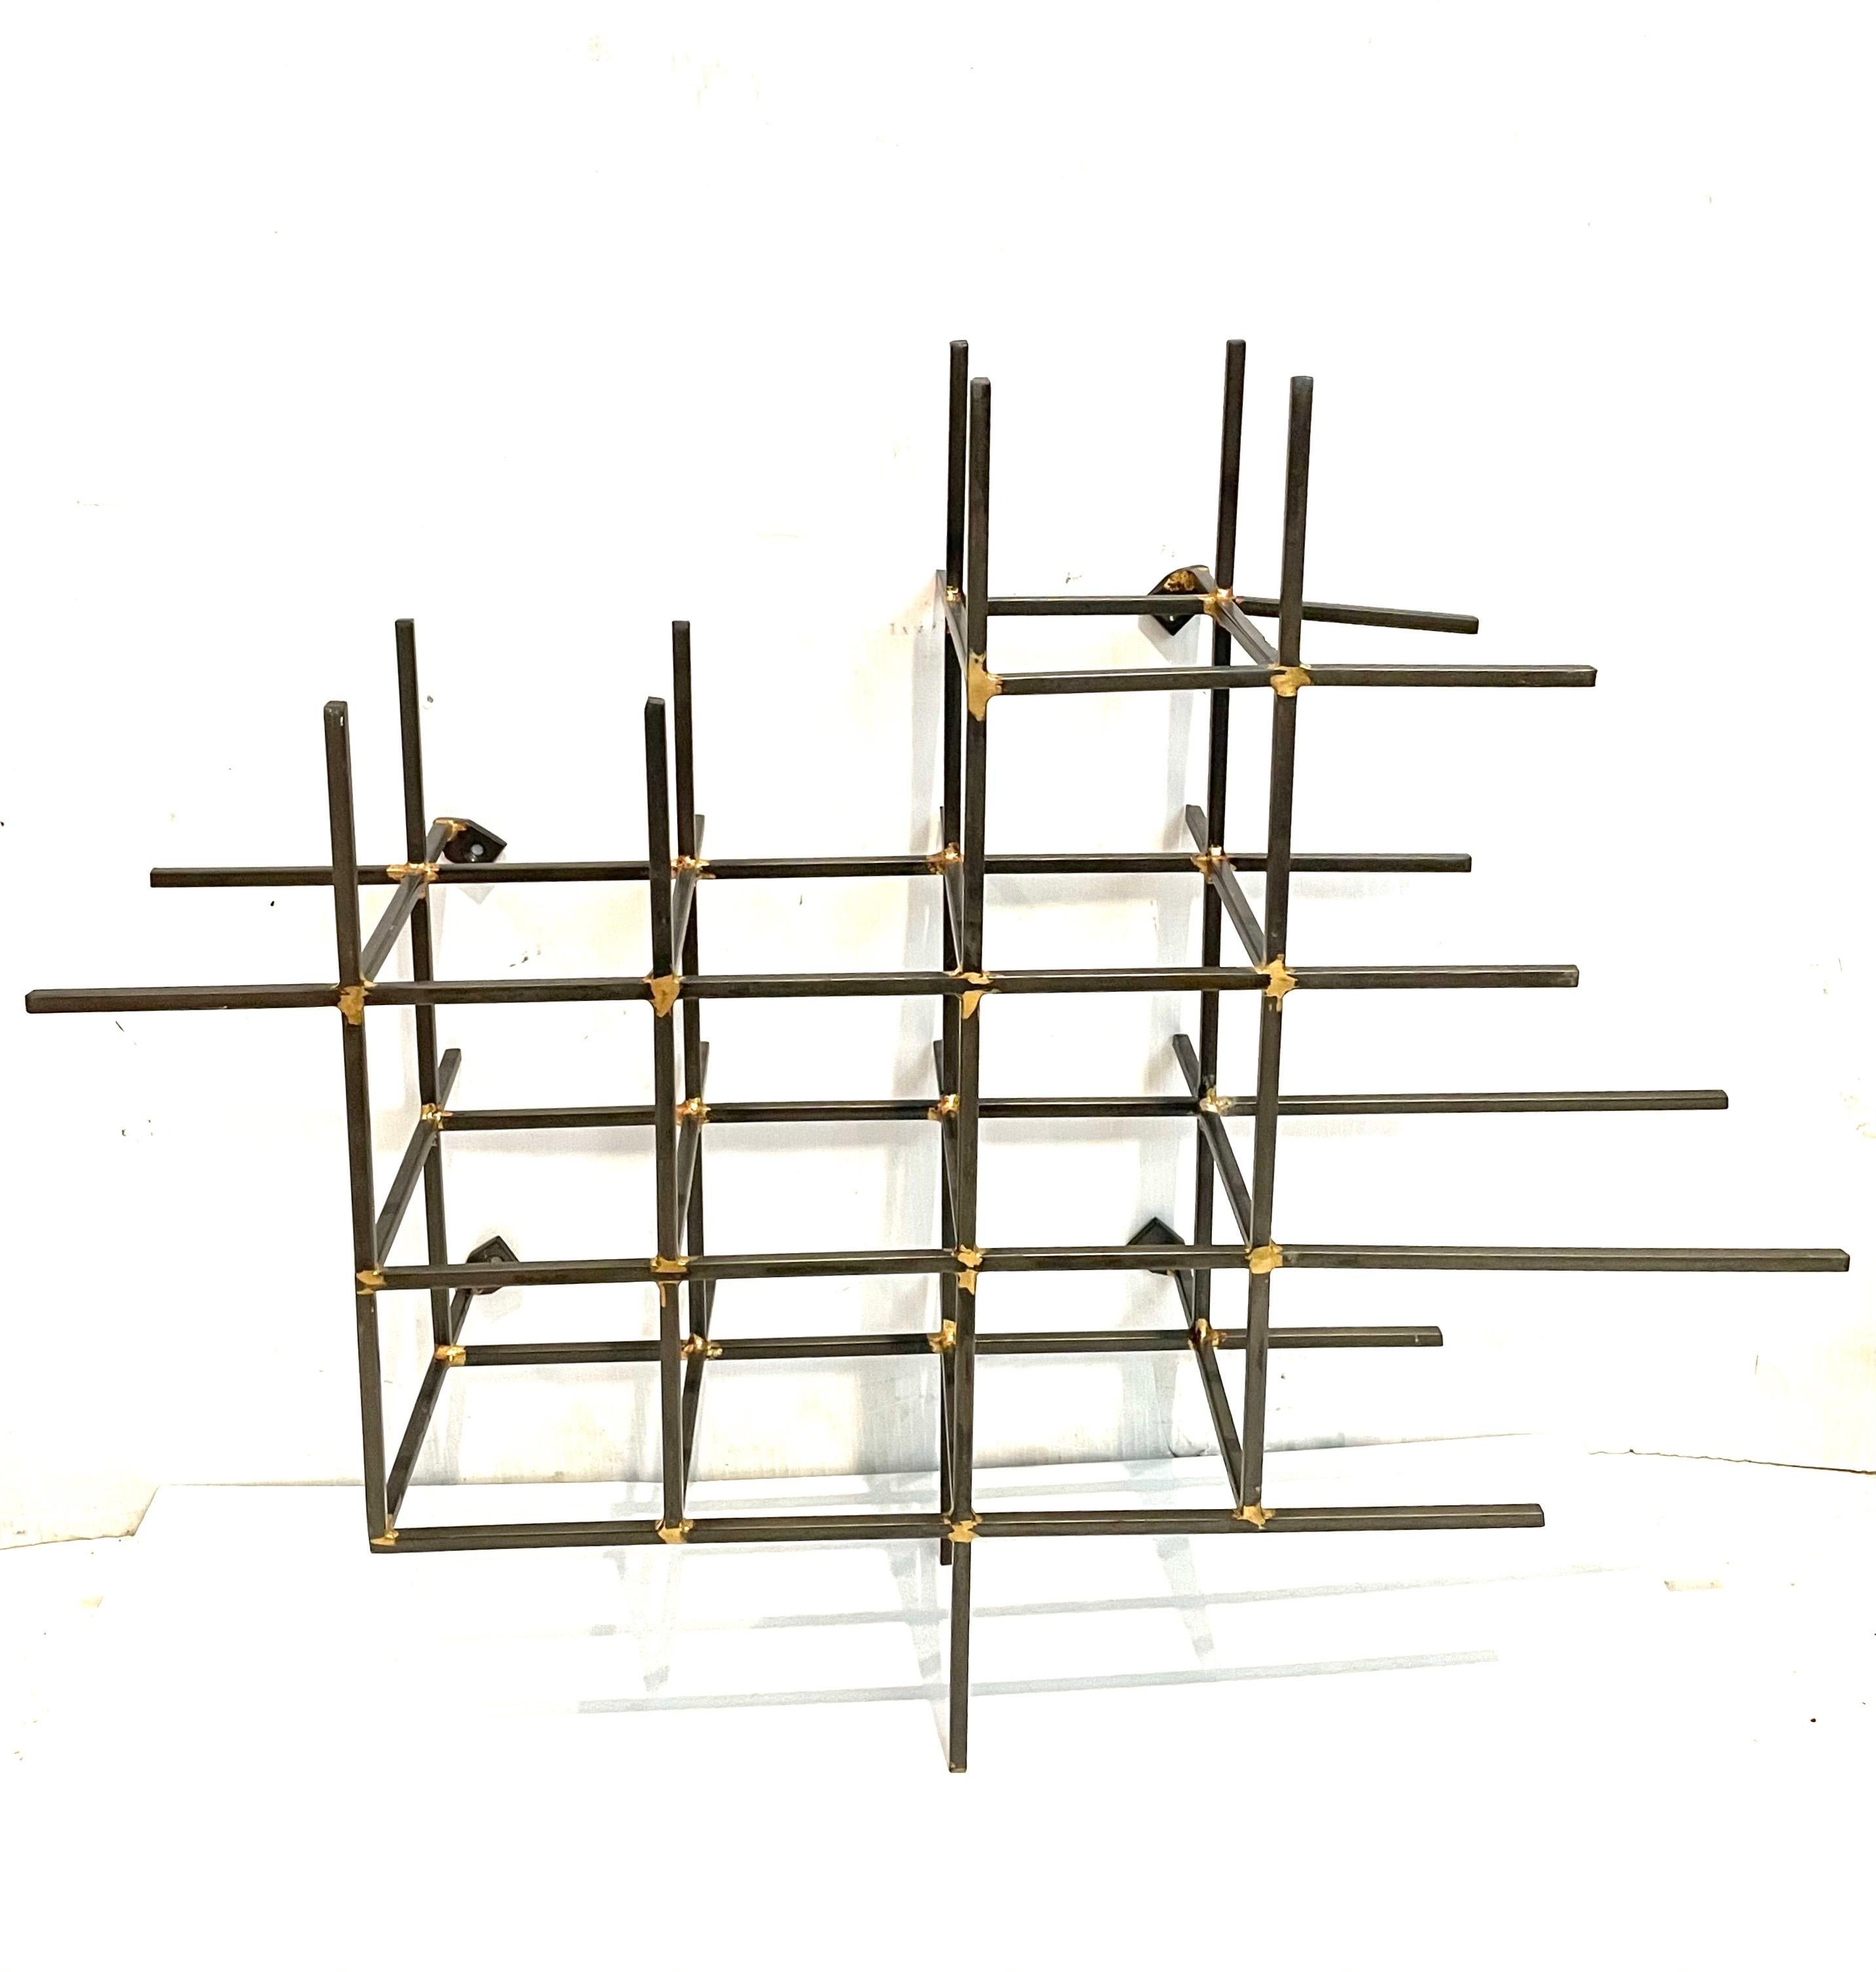 20th Century Modernist Abstract Steel & Brass Welded Wall Sculpture For Sale